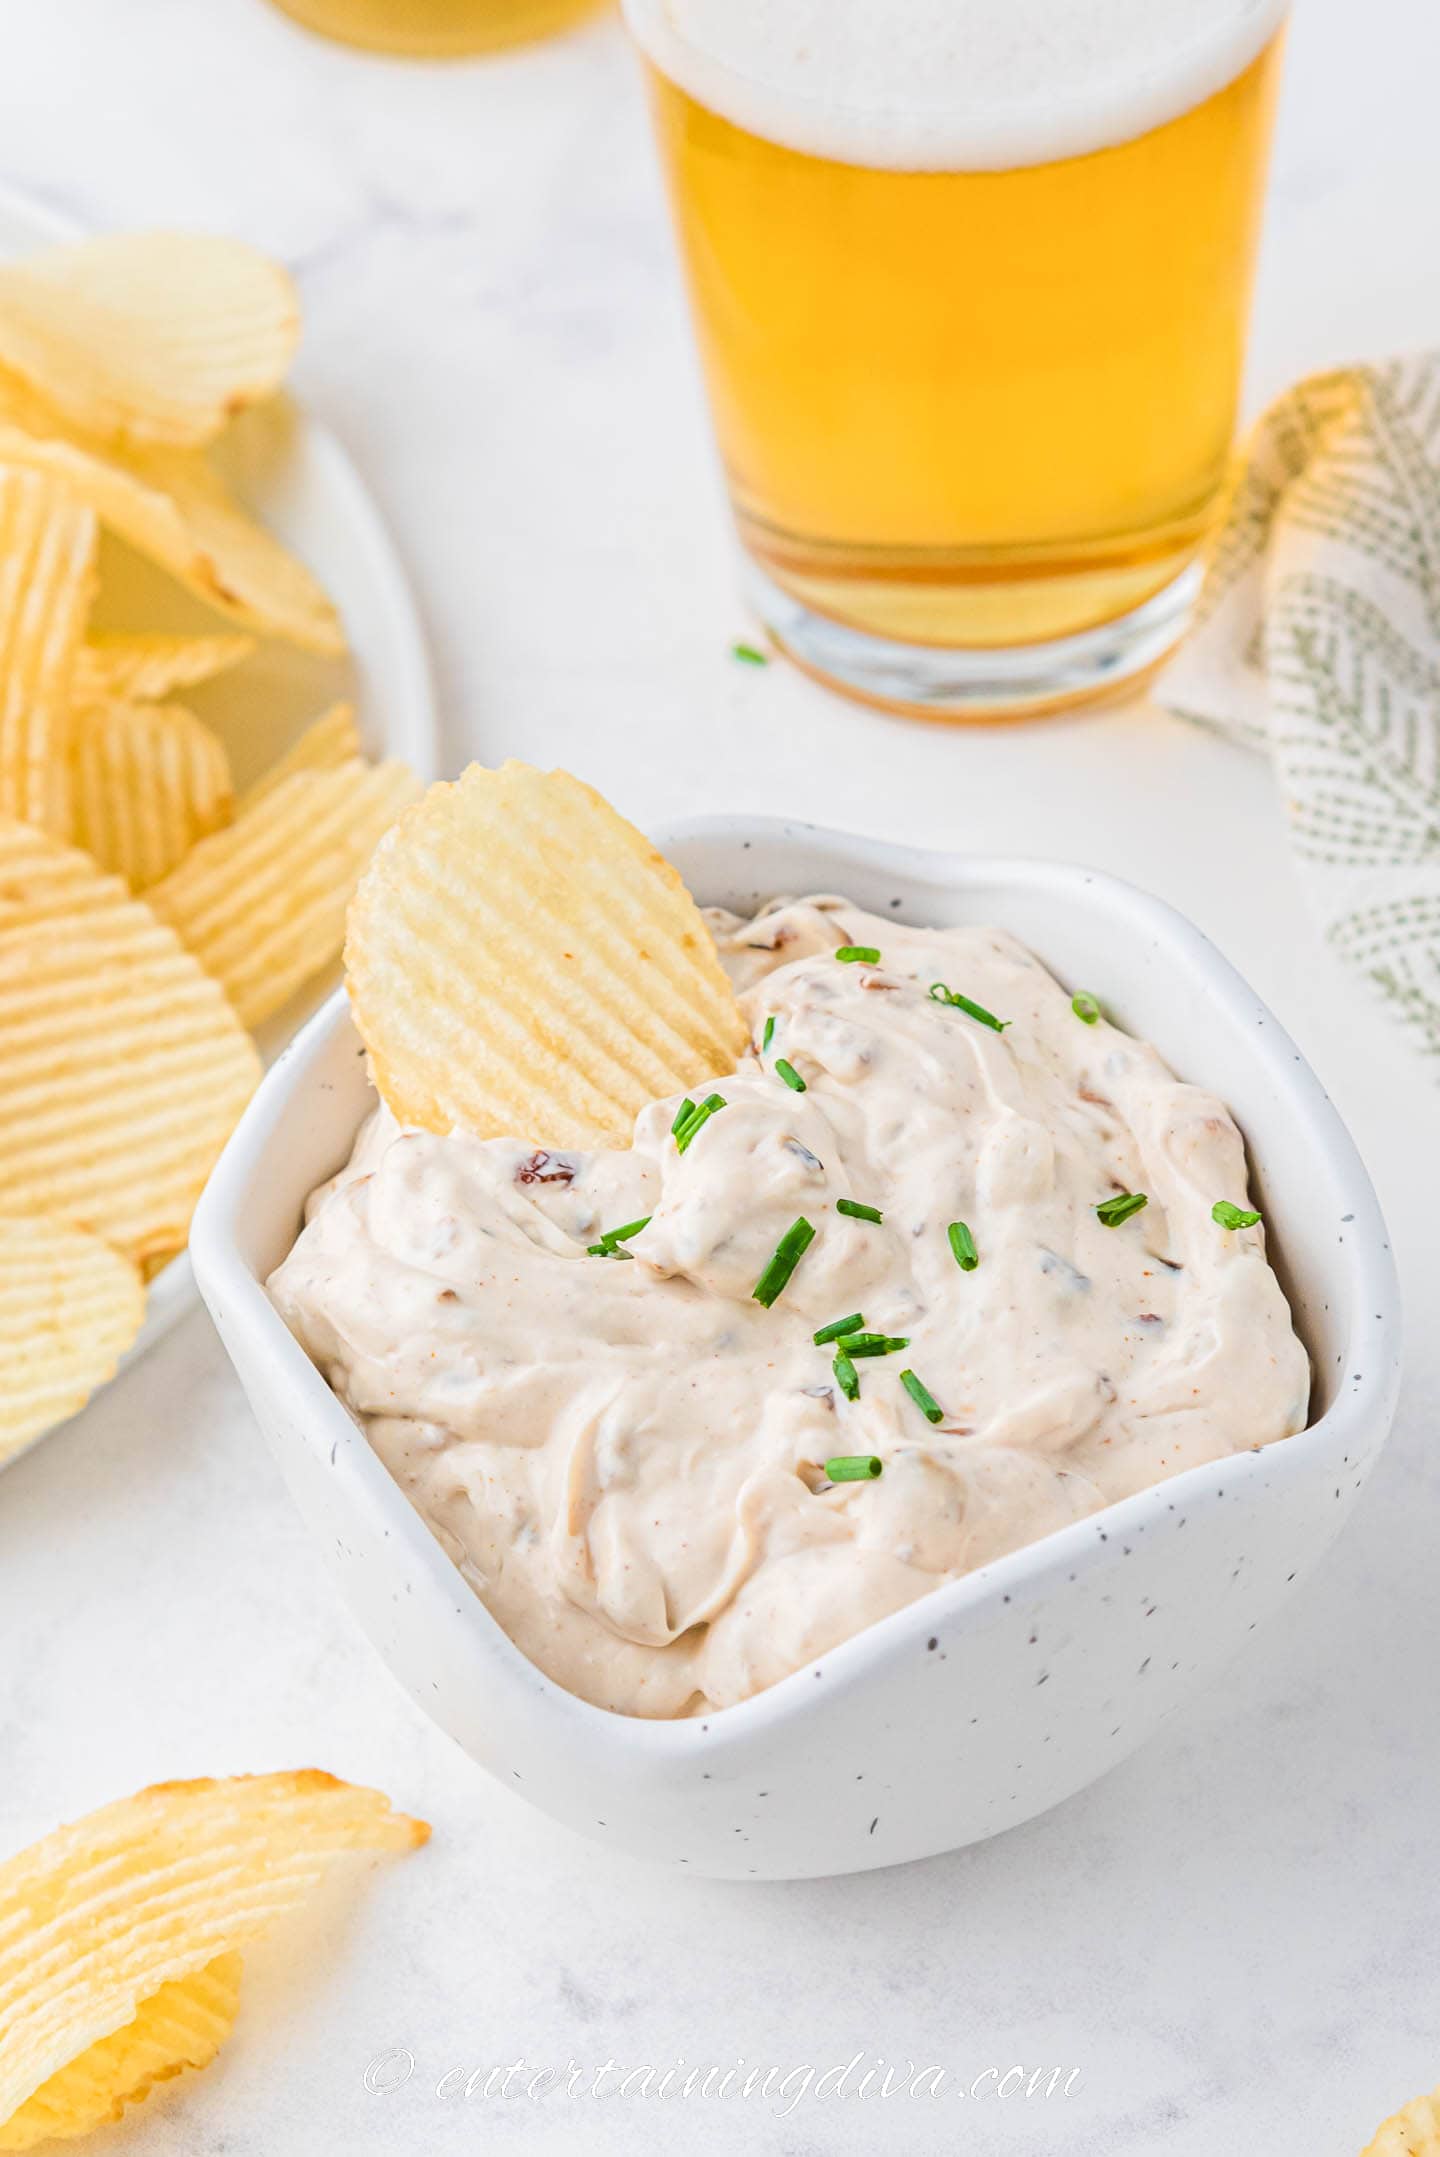 A bowl of caramelized onion dip in front of a plate of chips and a glass